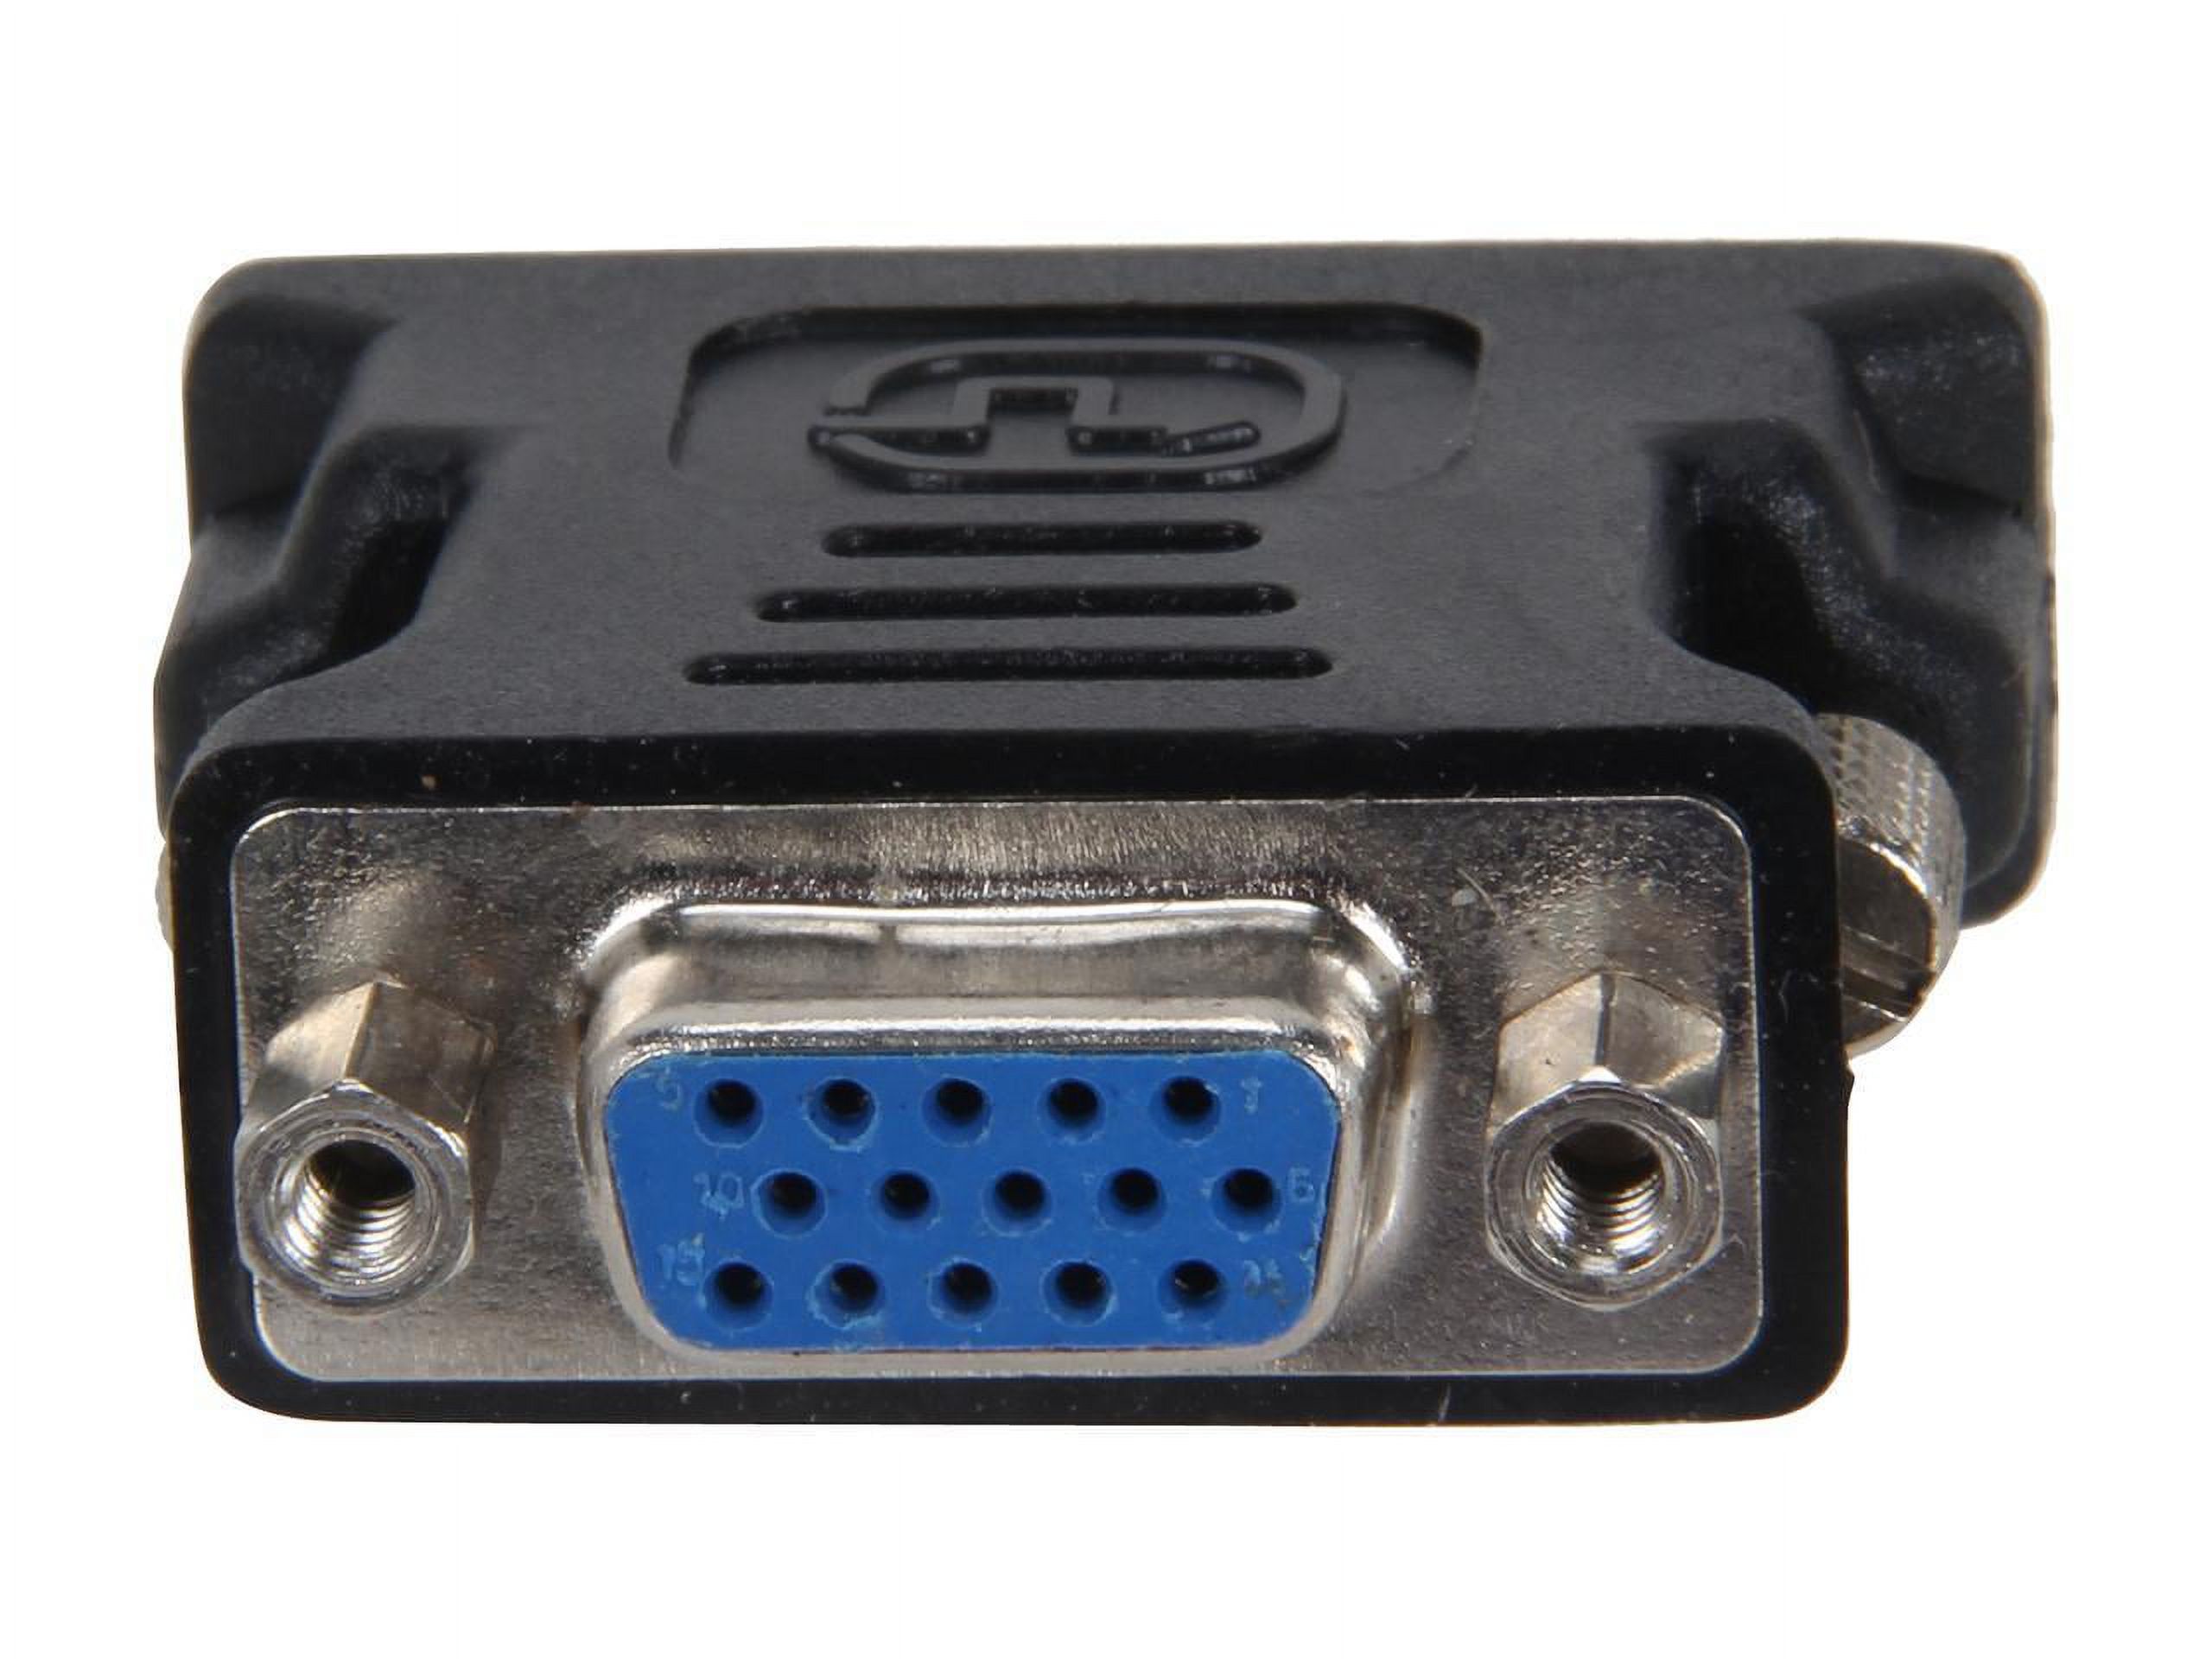 StarTech DVI to VGA Cable Adapter, Black - image 3 of 4